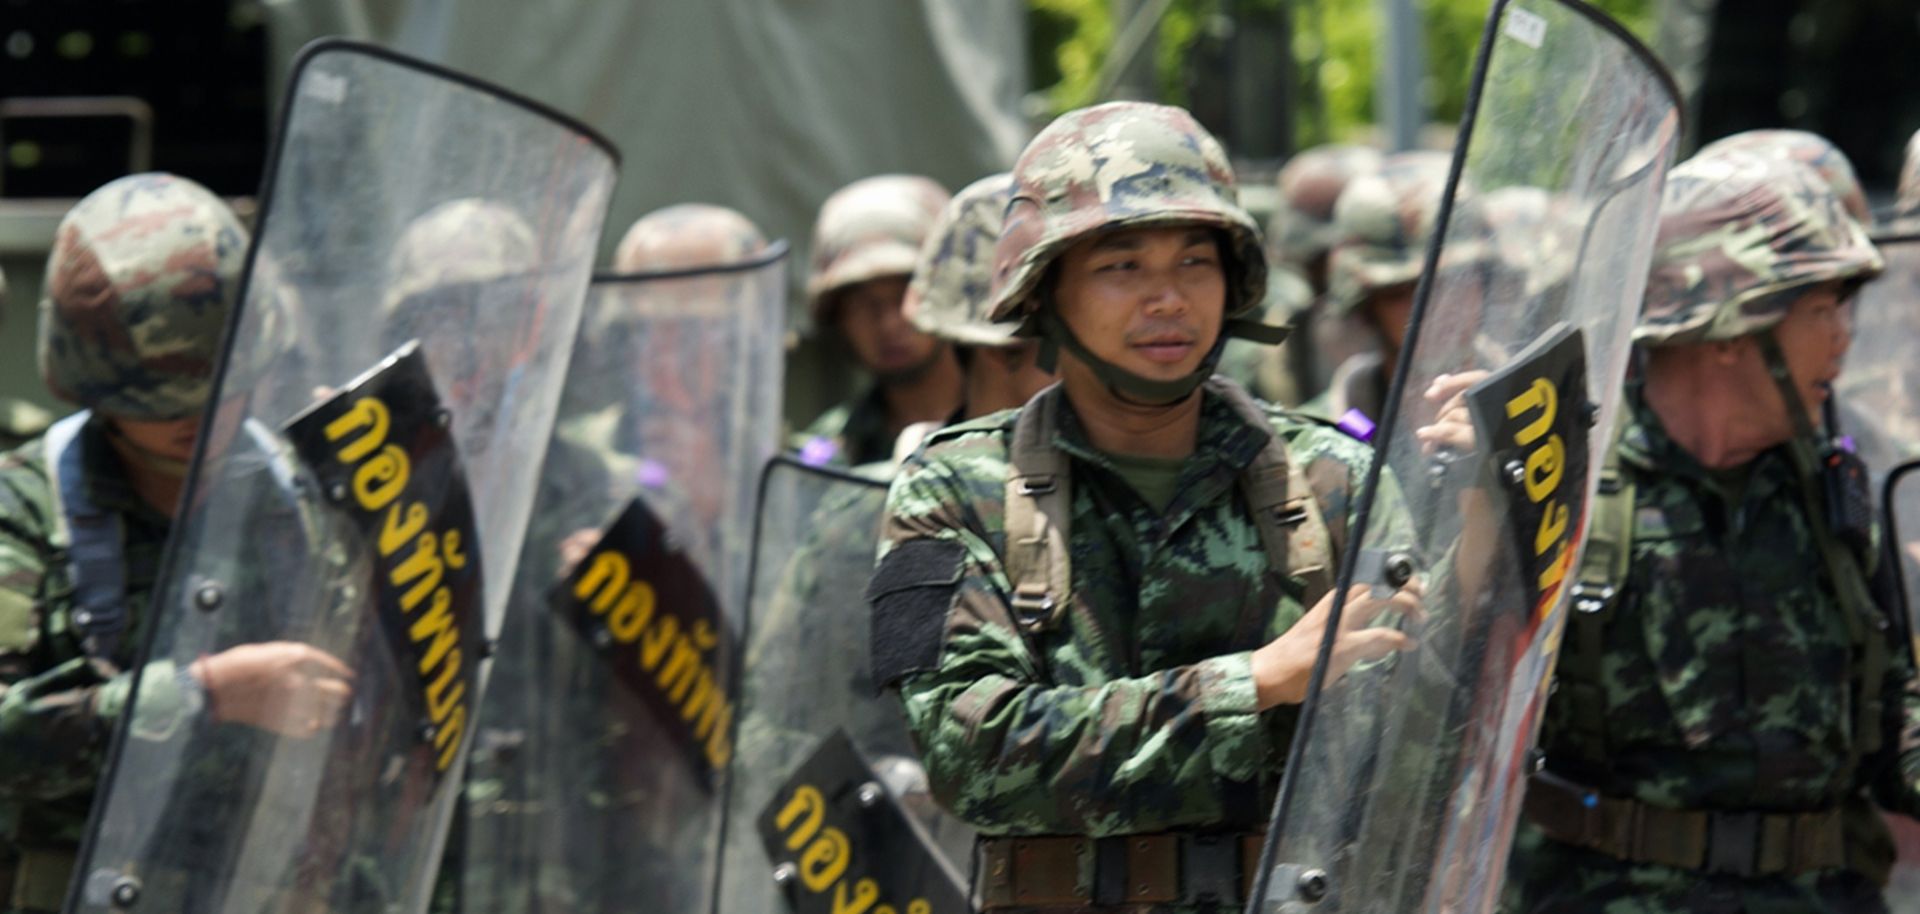 Thai soldiers patrol at the Army Club in Bangkok on May 20.